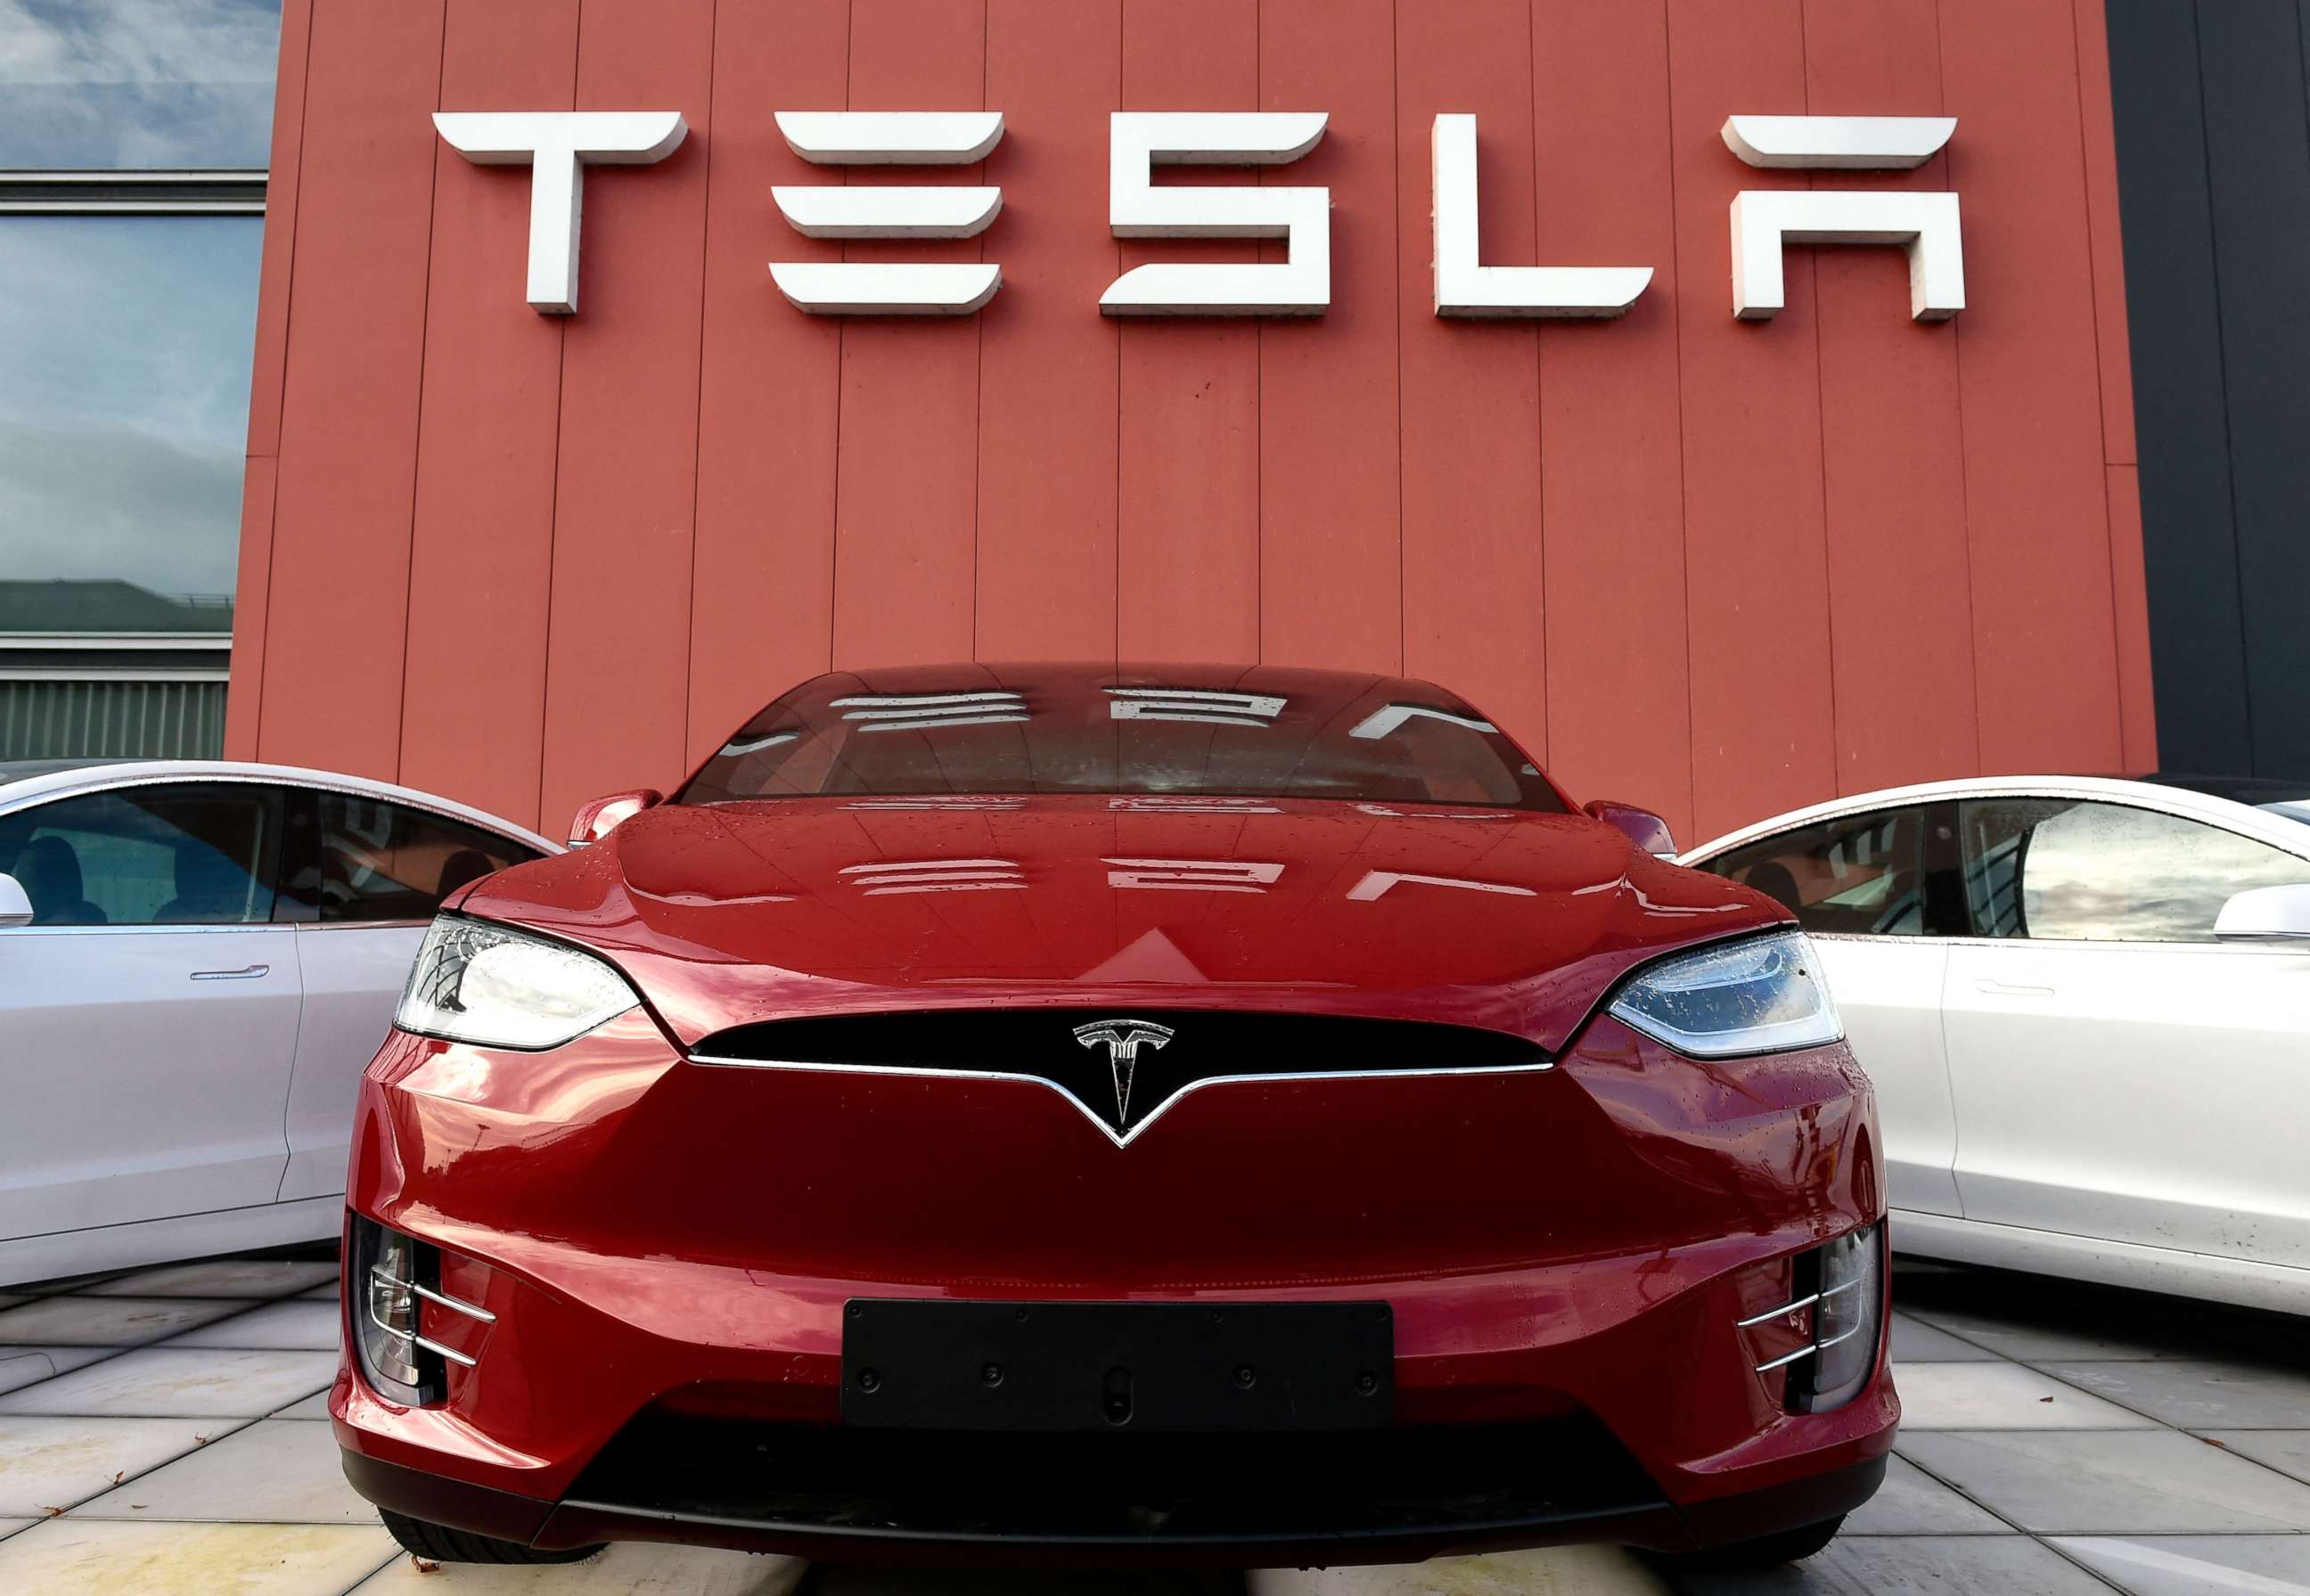 PHOTO: In this file photo taken on Oct. 23, 2019, the logo marks the showroom and service center for the US automotive and energy company Tesla in Amsterdam.